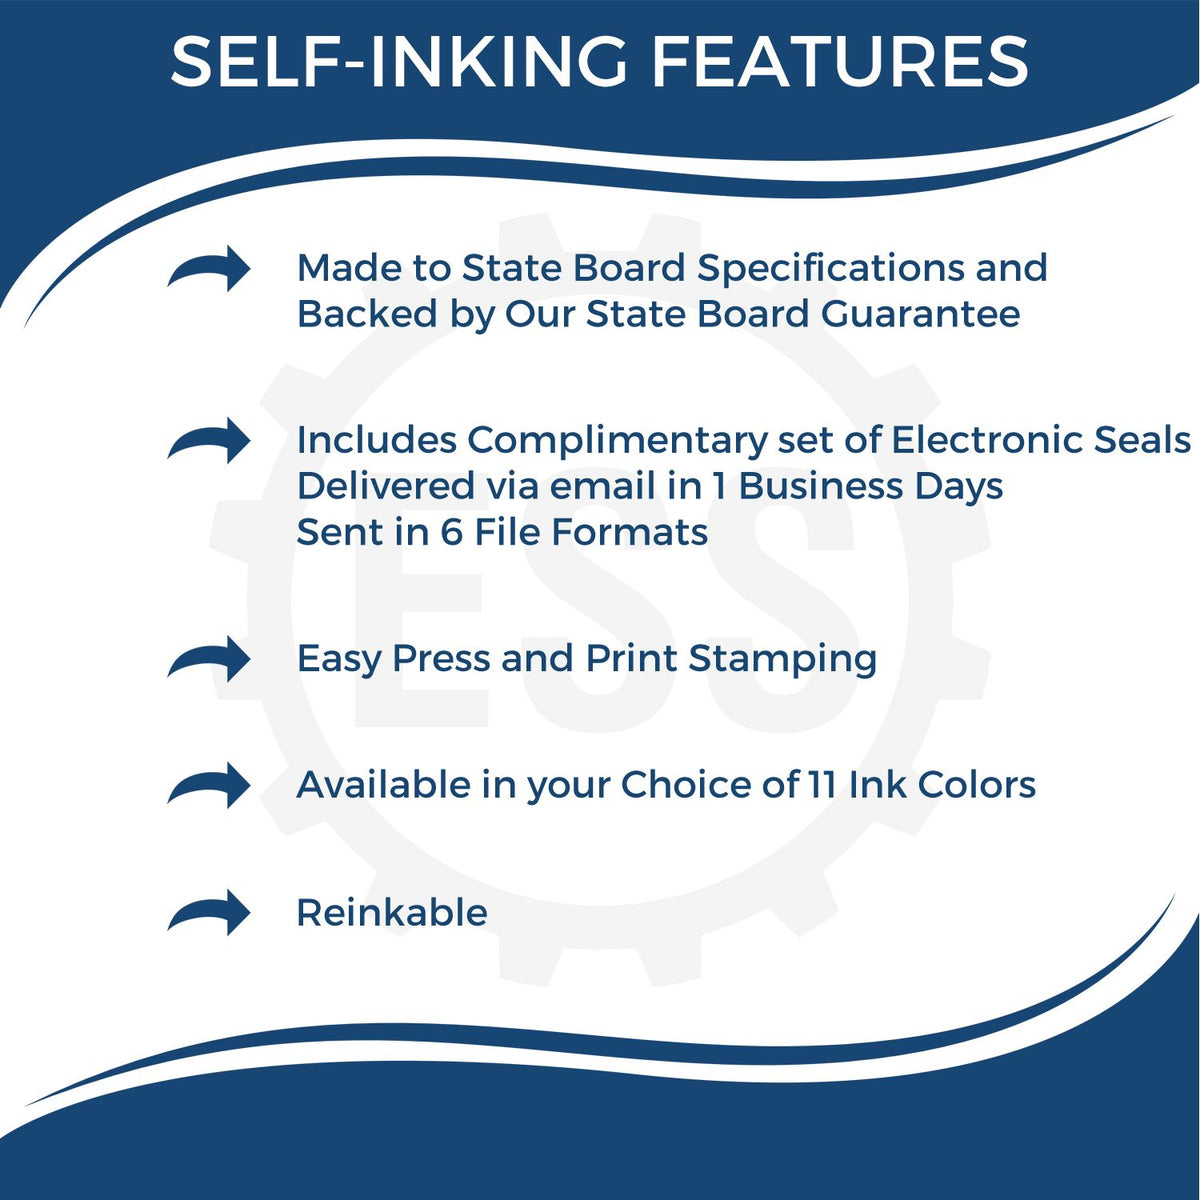 A picture of an infographic highlighting the selling points for the Self-Inking Nebraska Landscape Architect Stamp